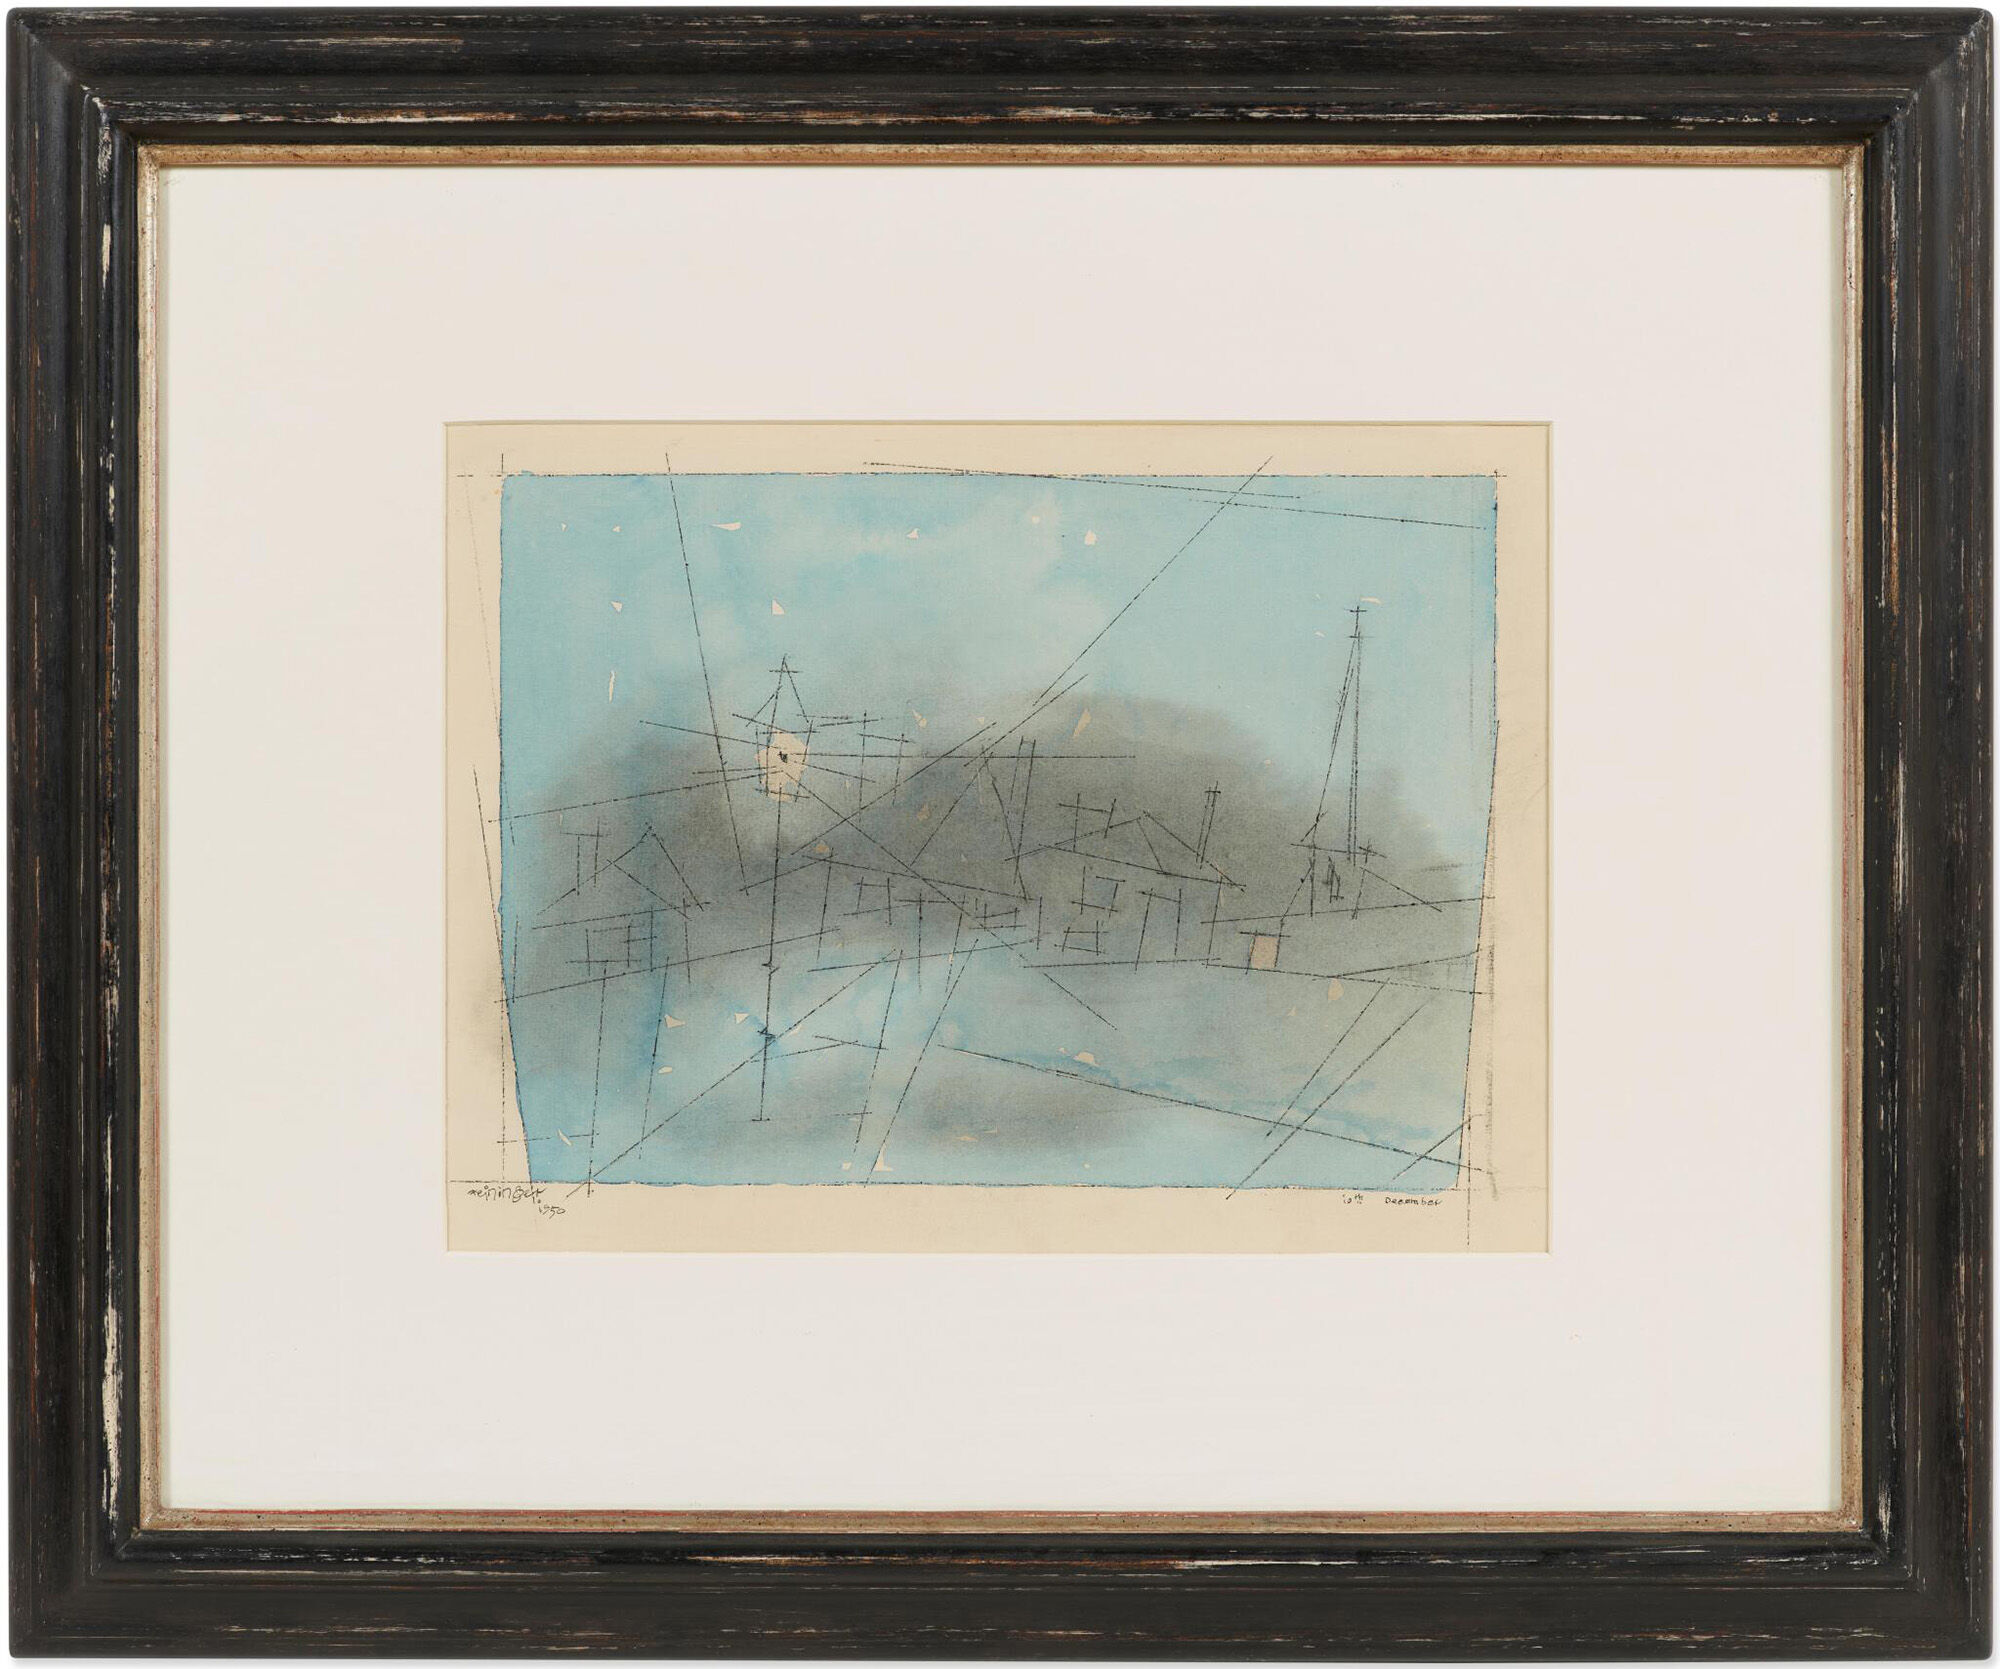 Picture "Village in Blue with Street Lamp" (1950) (Unique piece) by Lyonel Feininger